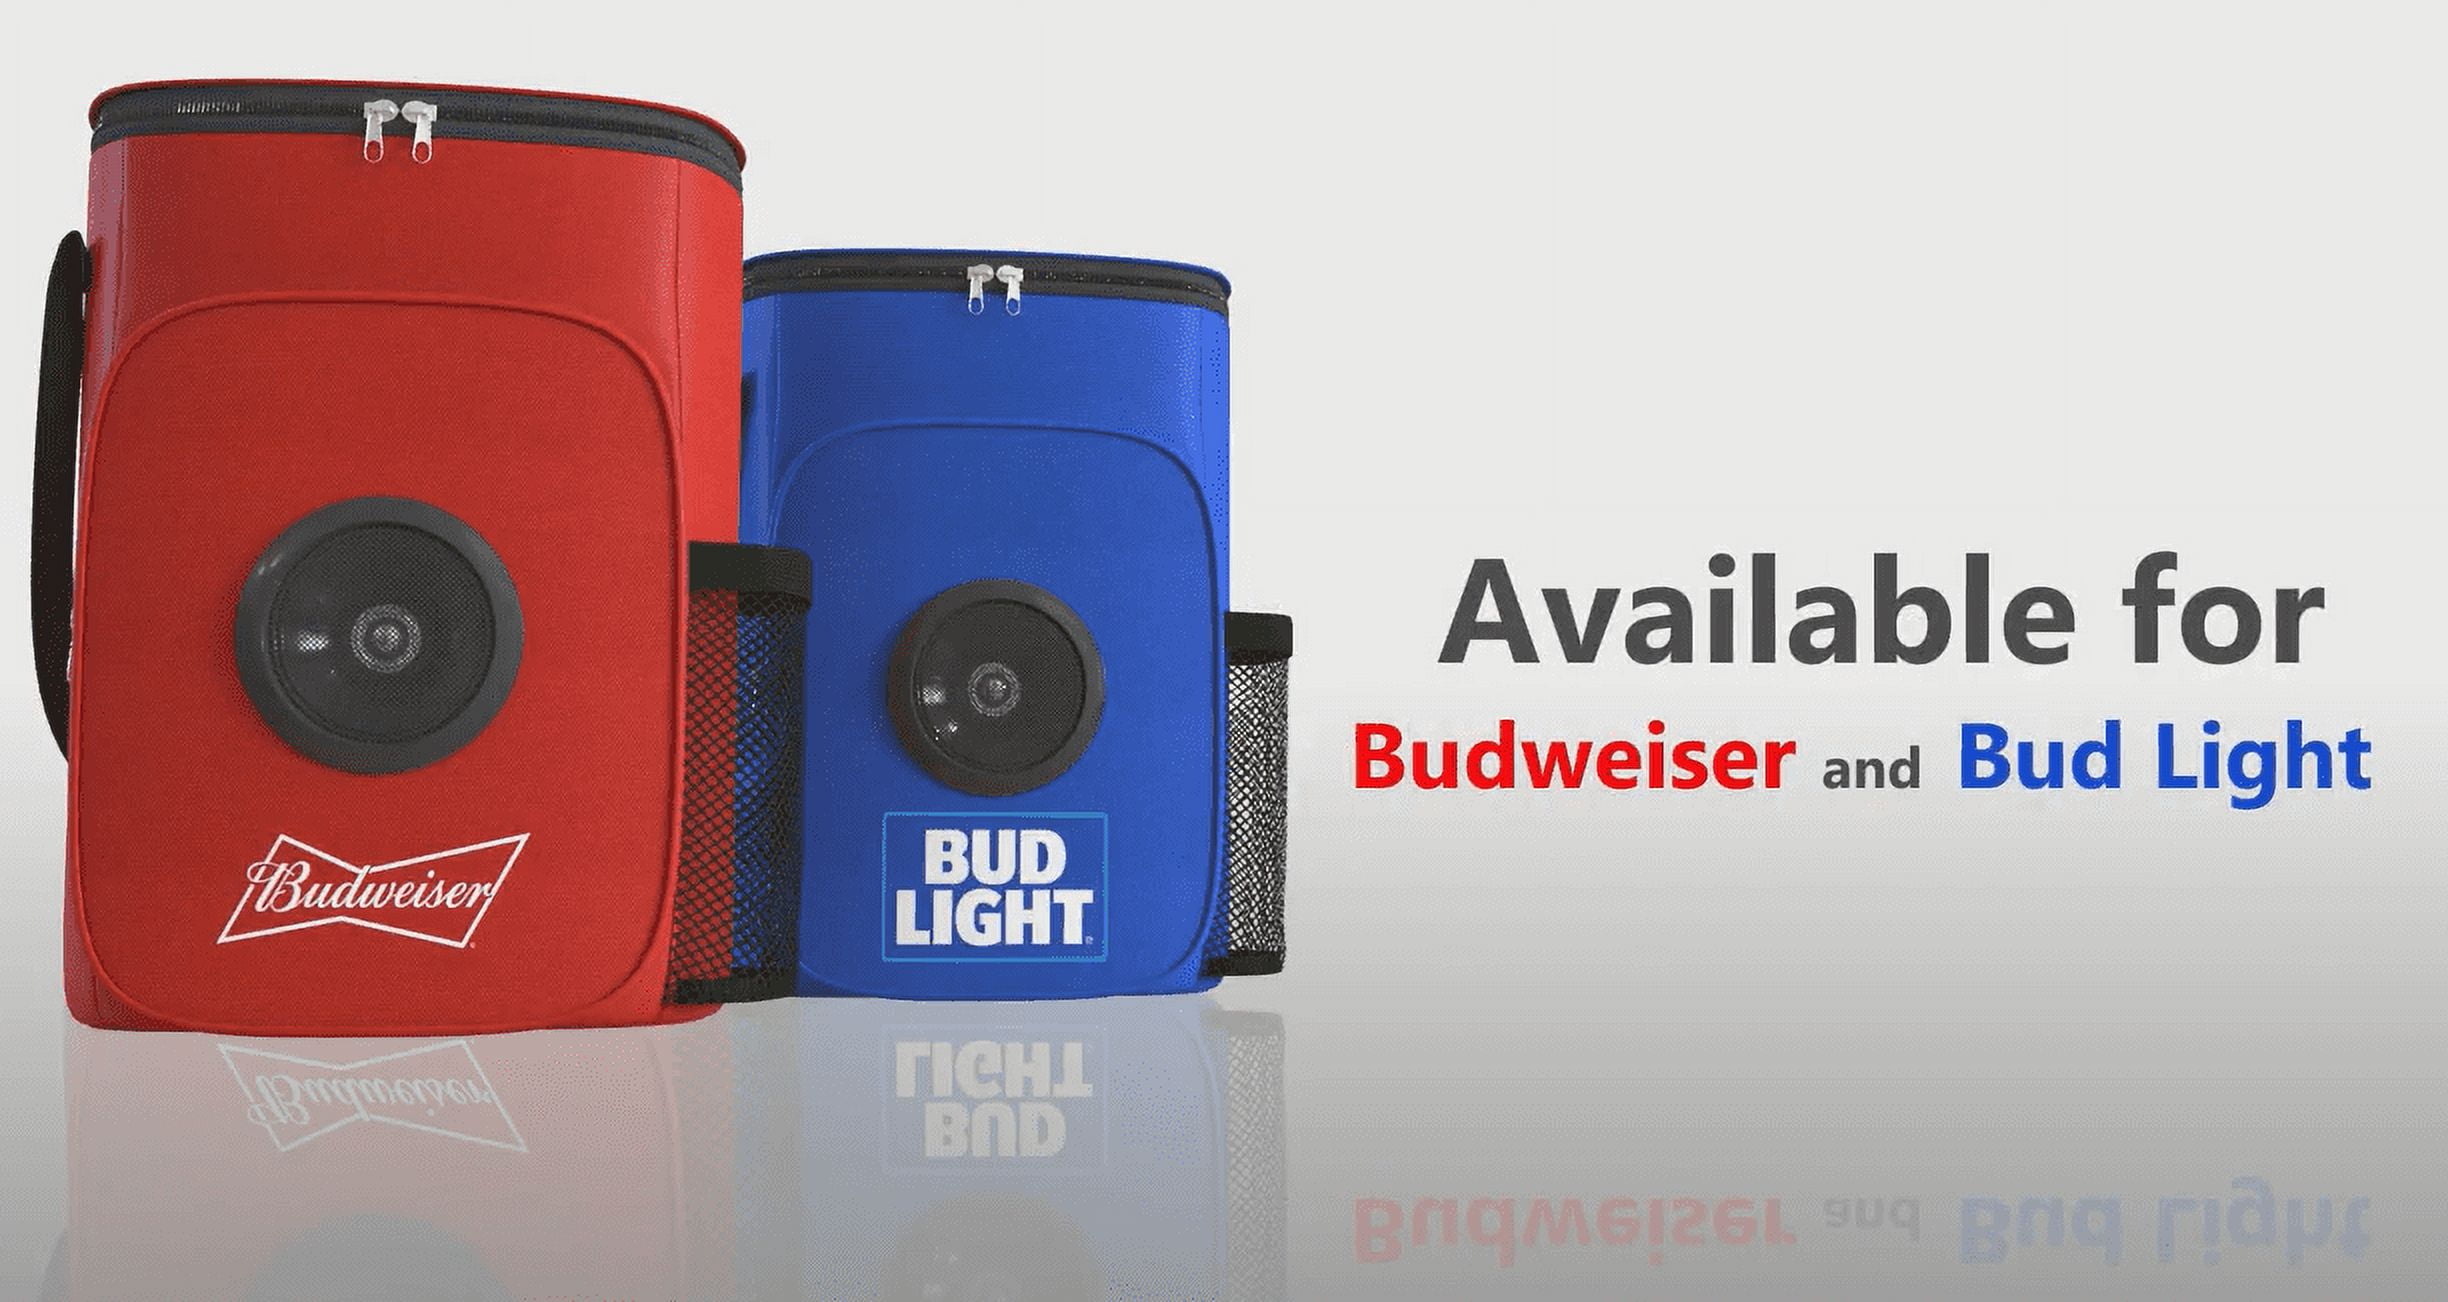  Budweiser Soft Can Shape Speaker Backpack Cooler Bluetooth  Portable Travel Cooler with Built in Speaker Wireless Speaker Cool Ice Pack  Cold Beer Stereo for Apple iPhone, Samsung Galaxy : Electronics